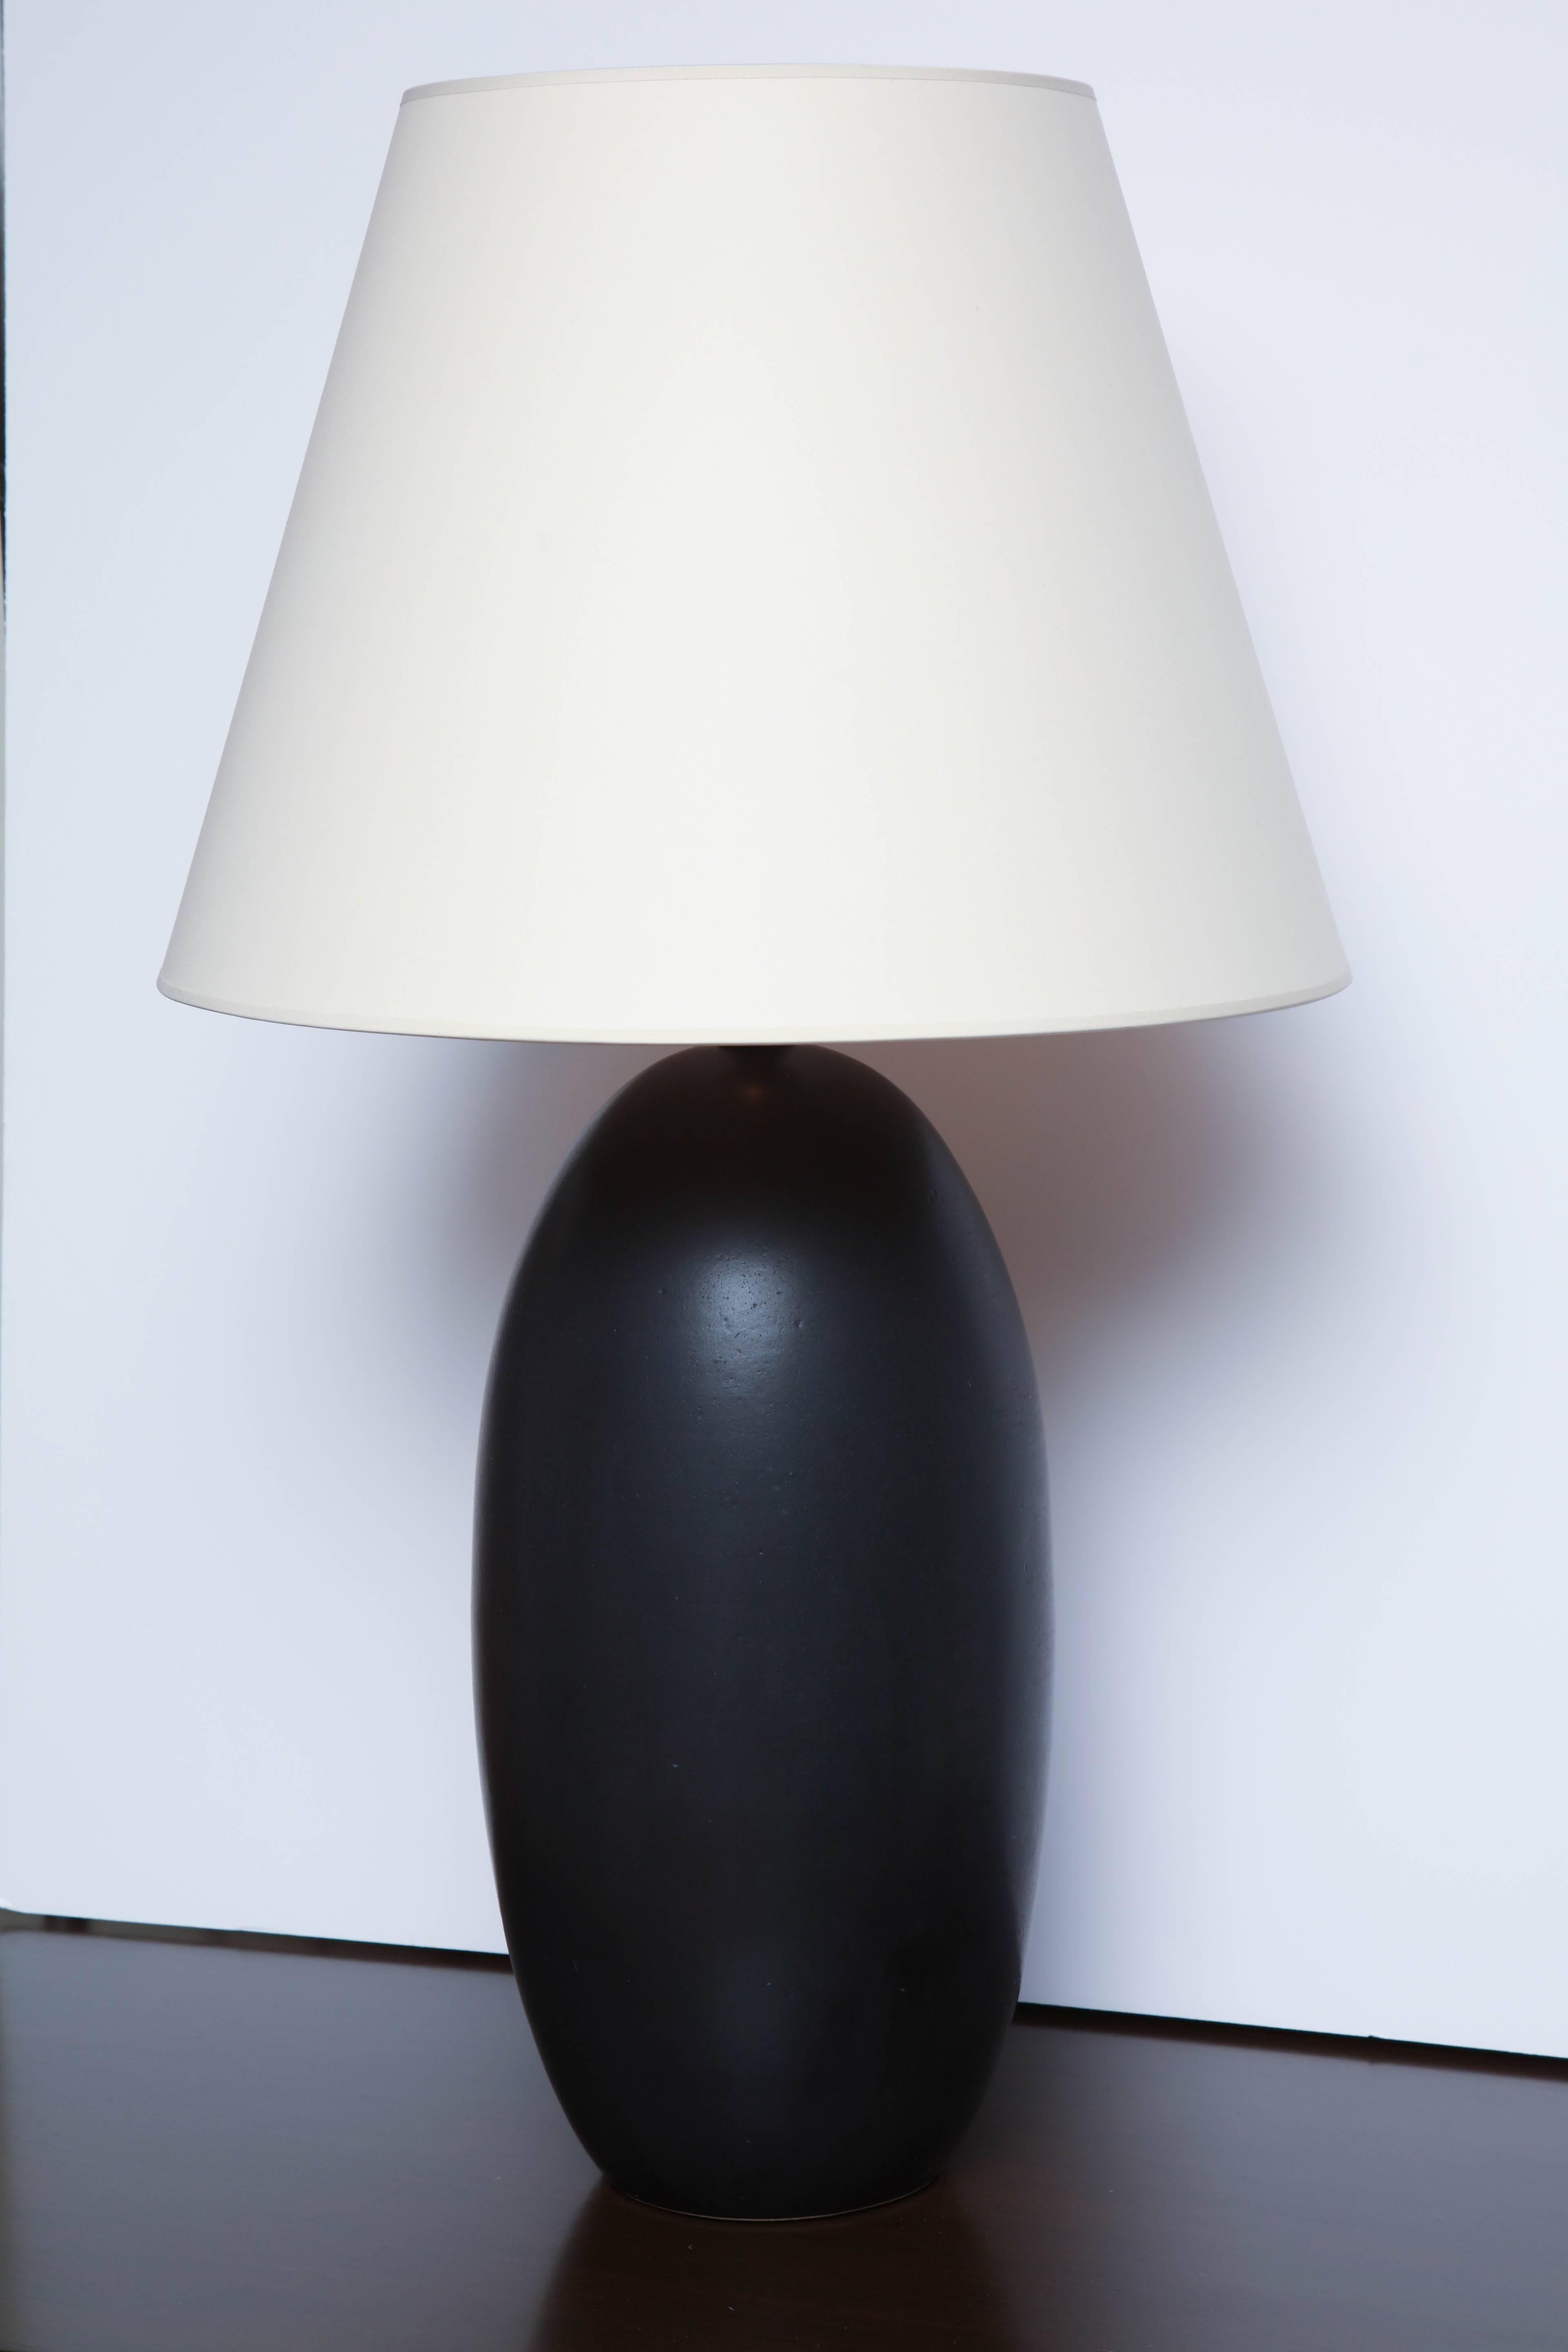 Pitch glaze egg-shaped lamp by Warner Walcott
Also available in nude and other glazes, shade options available.
 